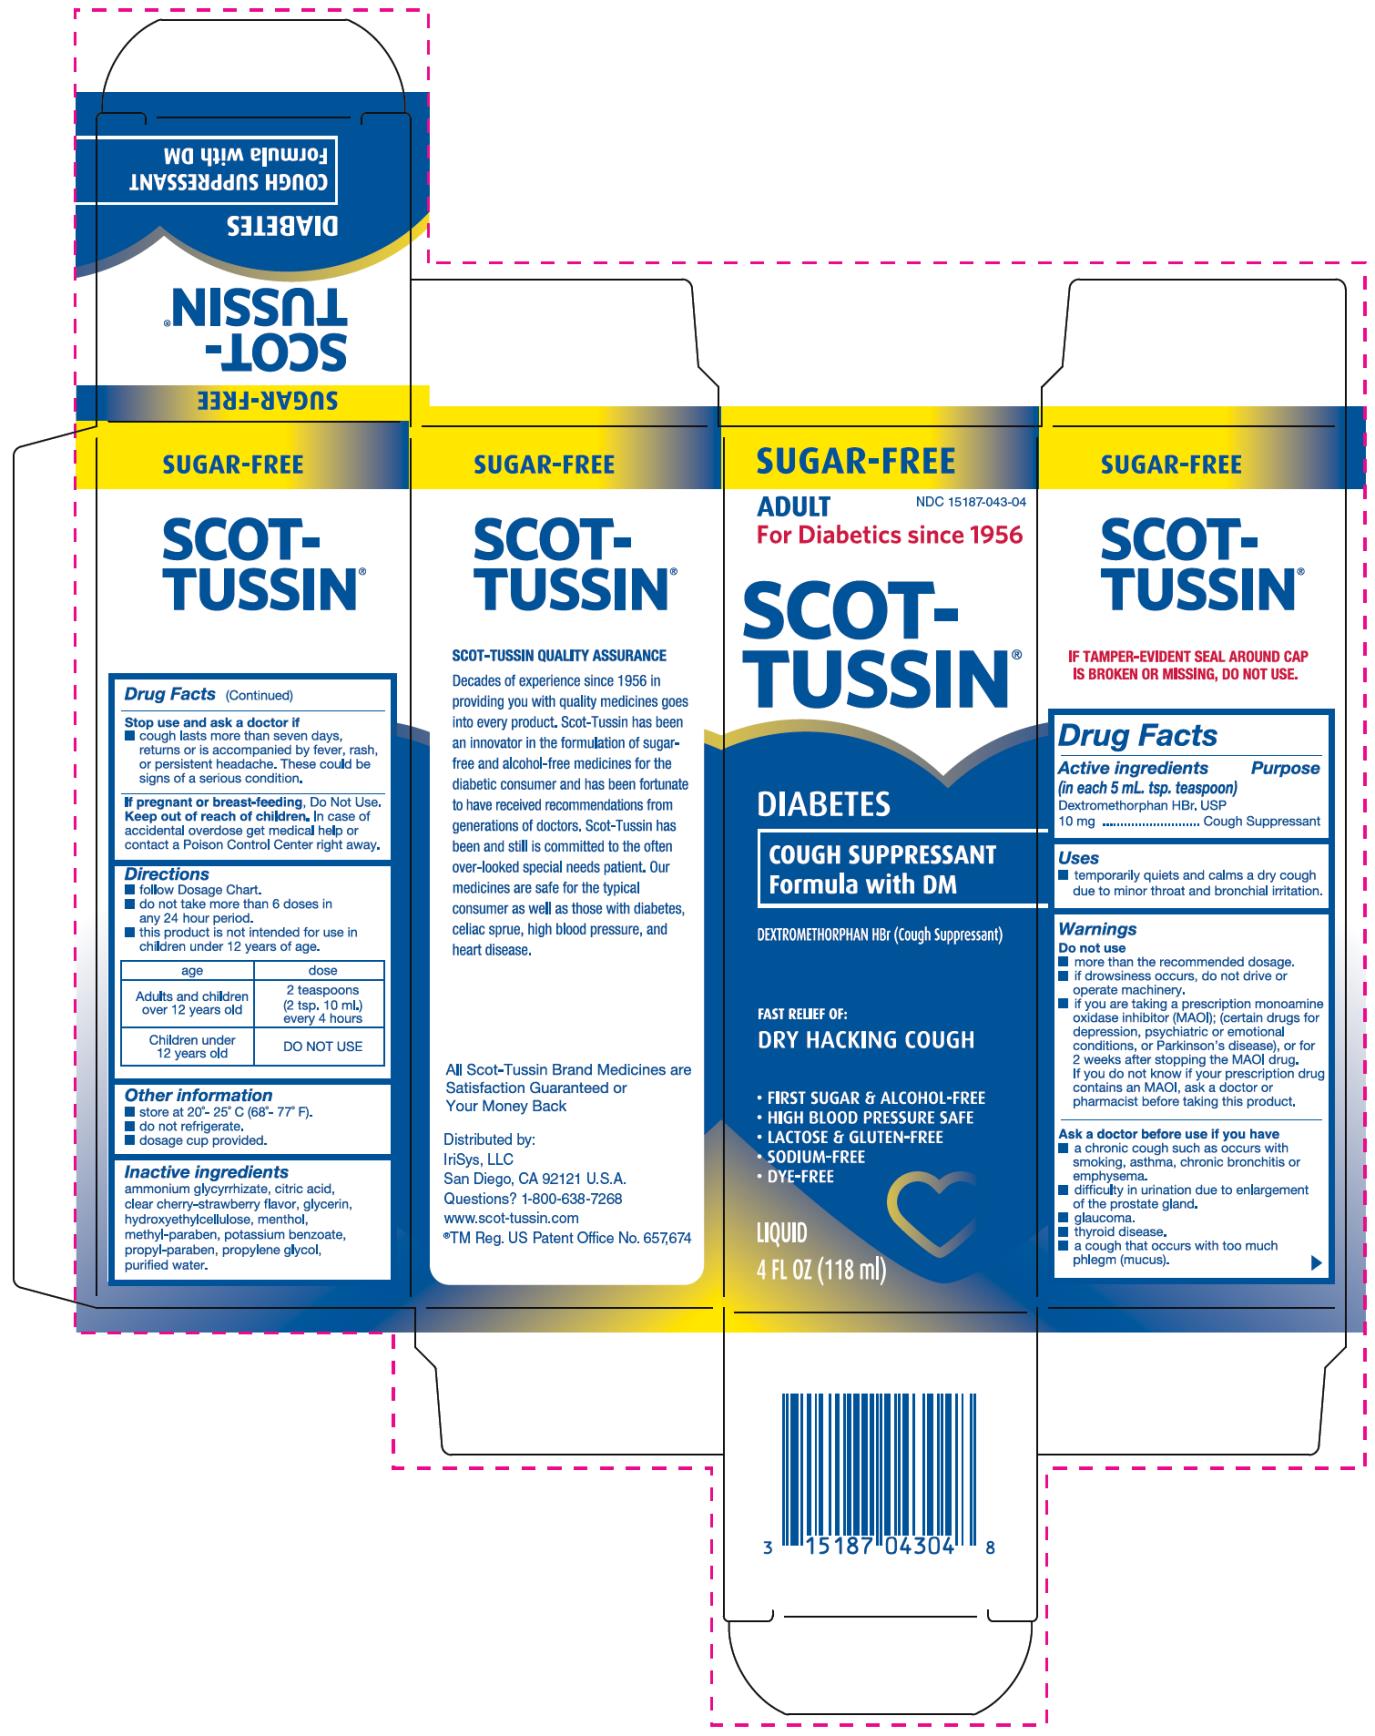 PRINCIPAL DISPLAY PANEL 
SUGAR-FREE
ADULT
NDC 15187-043-04
For Diabetics since 1956
SCOT-TUSSIN®
DIABETES
COUGH SUPPLESSANT
Formula with DM
DEXTROMETHORPHAN HBr (Cough Suppressant)
FAST RELIEF OFF
DR